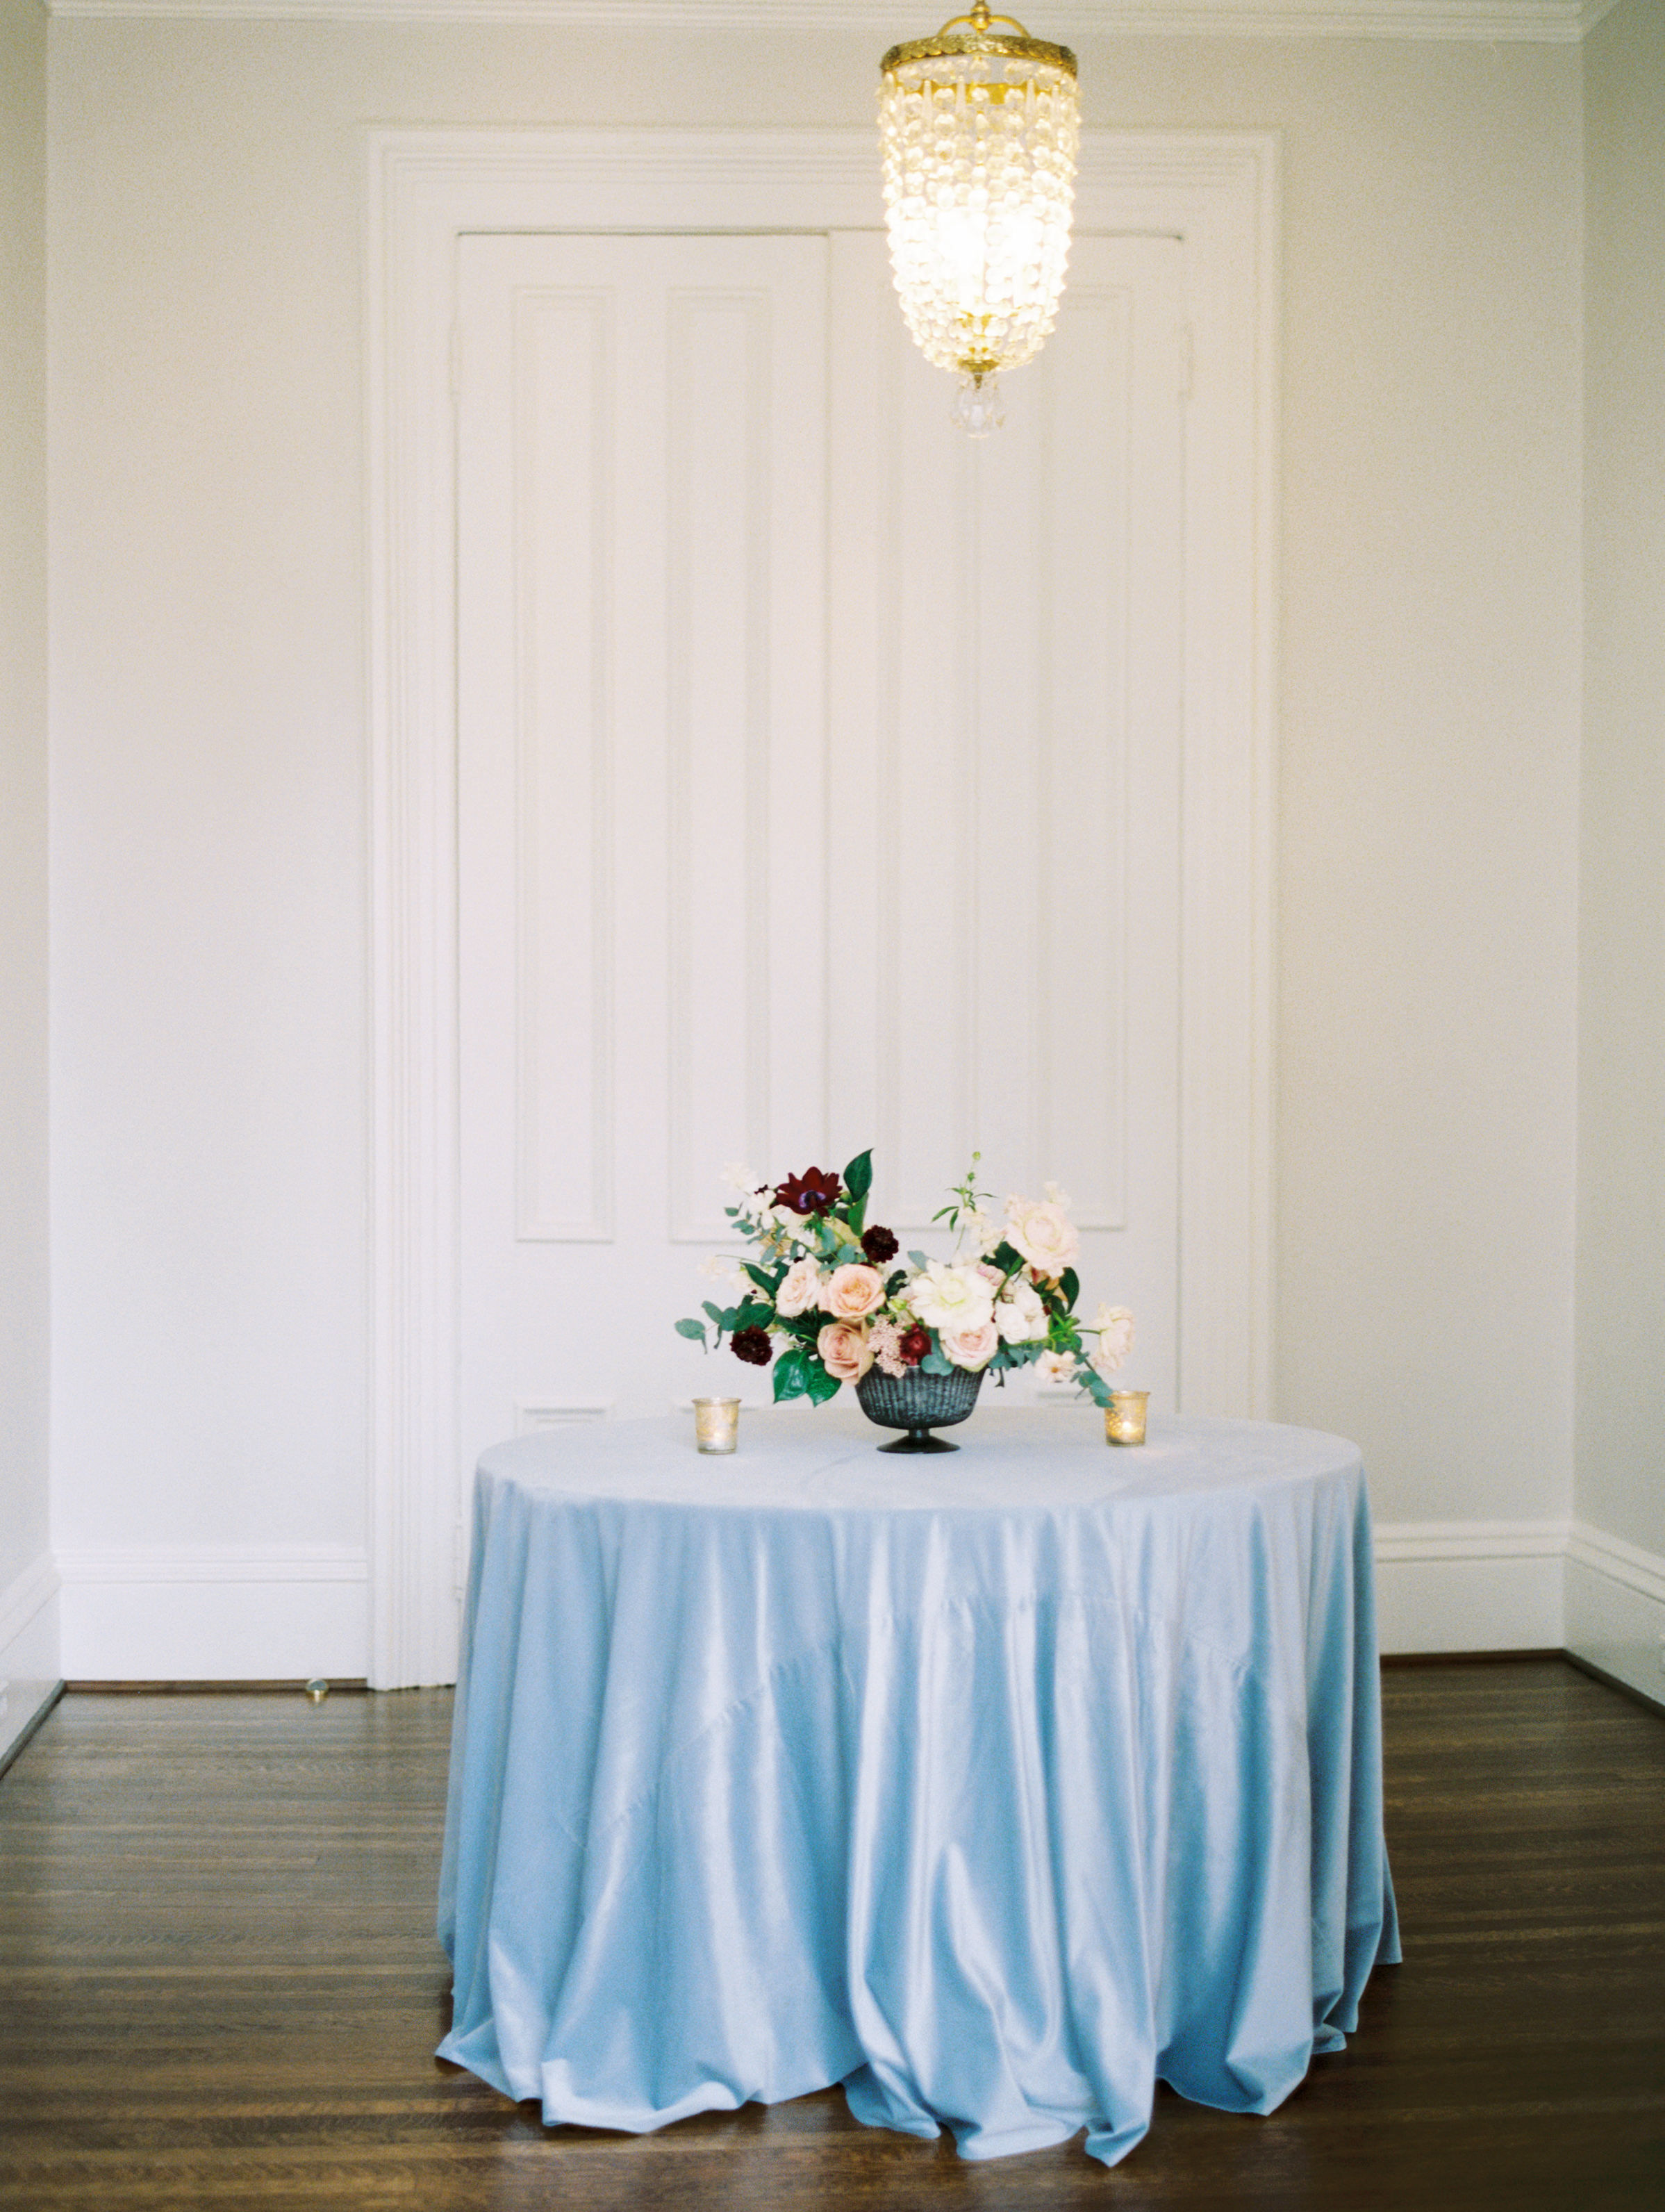 Dusty blue velvet tablecloth at McAlister-Leftwich House in Greensboro, NC, historic wedding and event venue